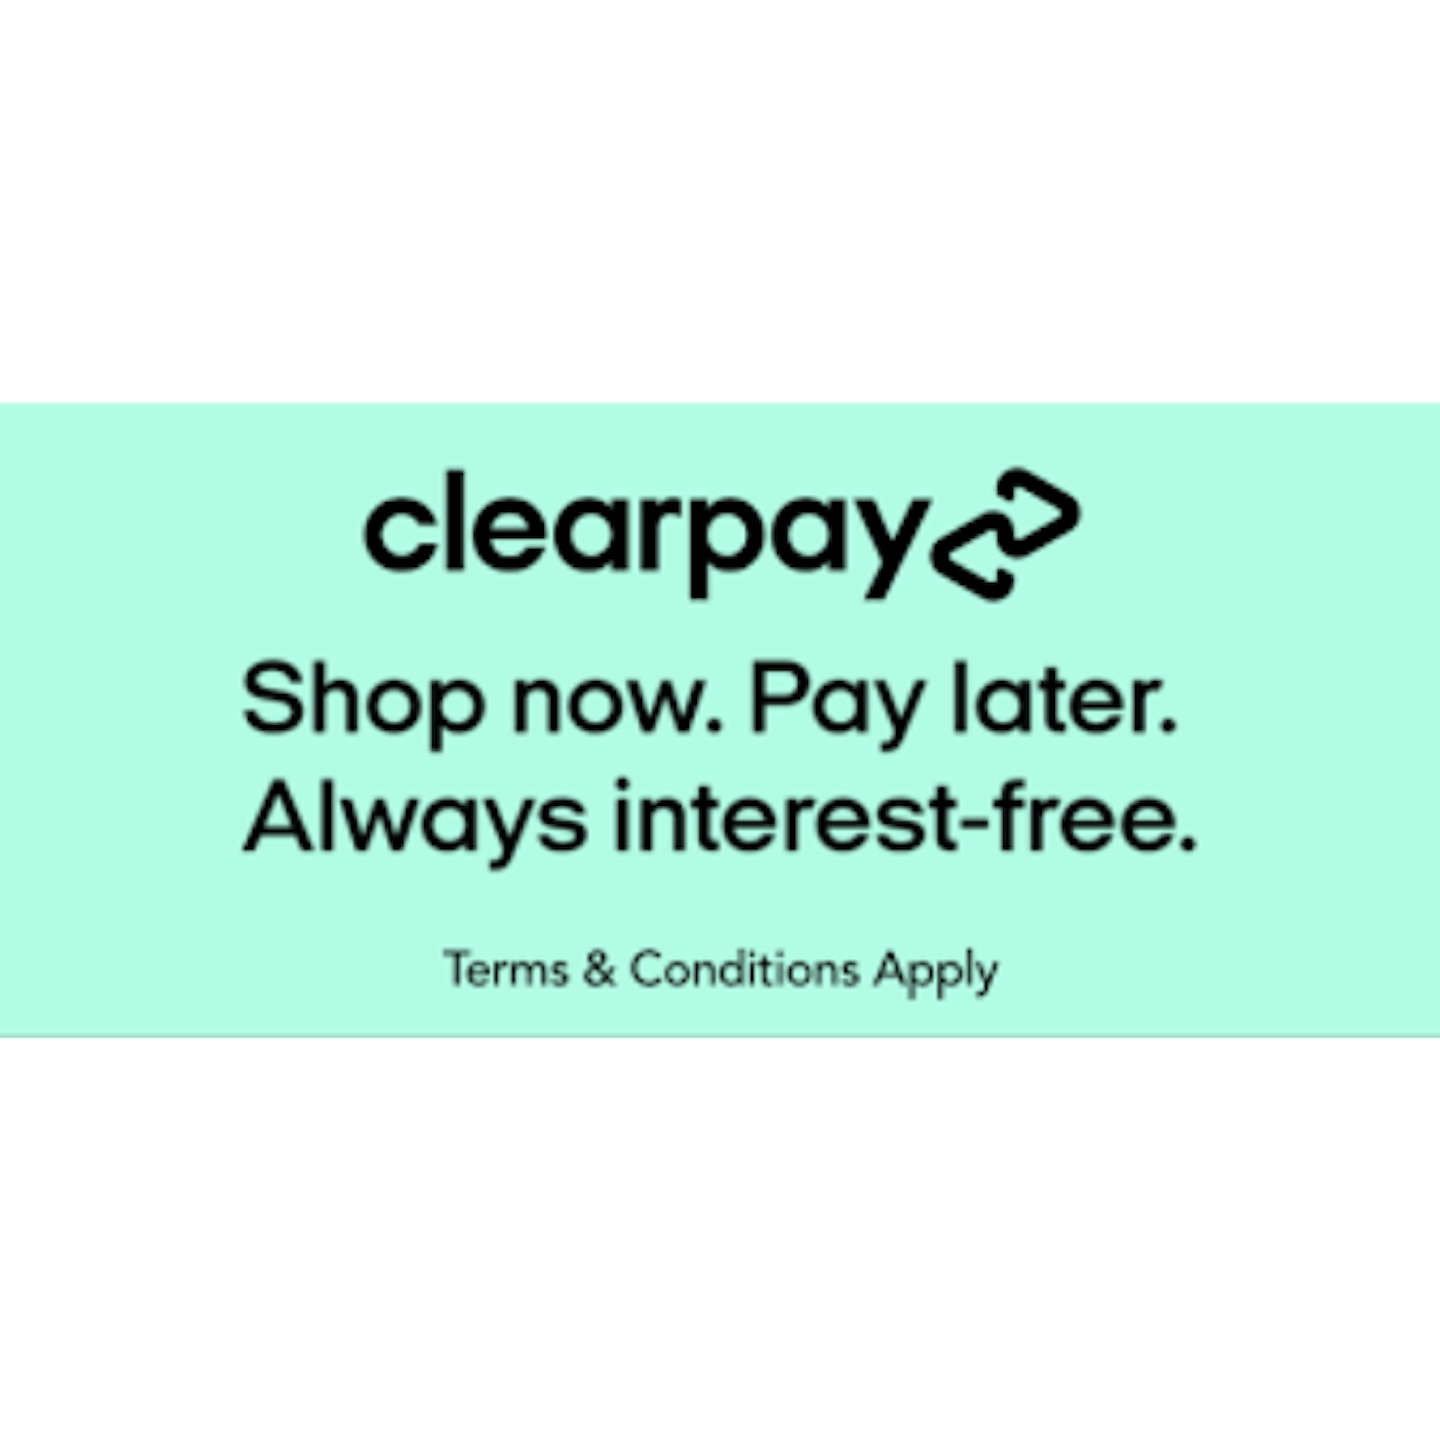 buy now pay later apps clearly